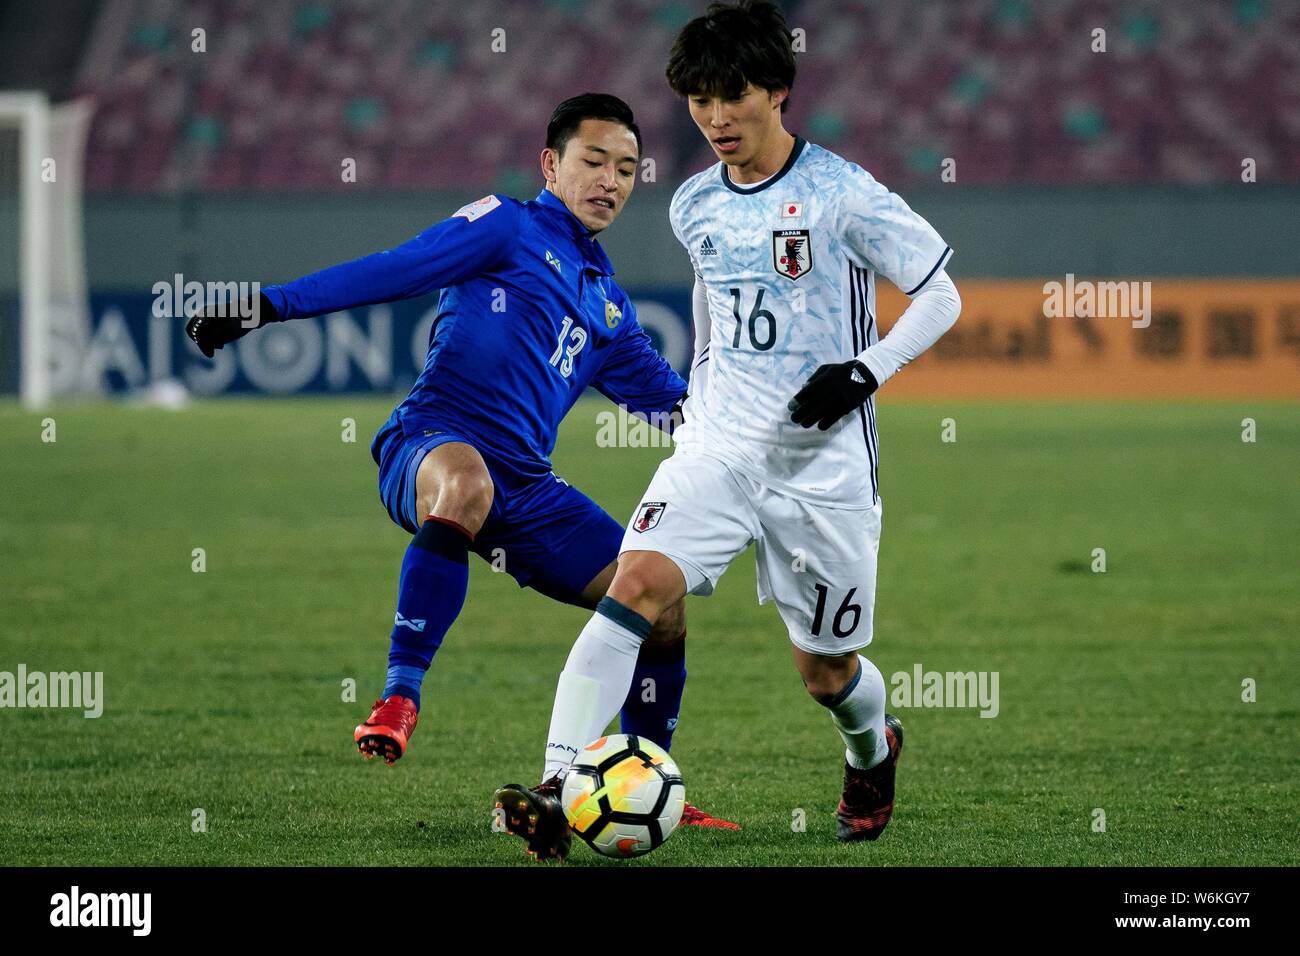 Shion Inoue, right, of Japan kicks the ball to make a pass against Phicha Au-Tra of Thailand in their Group B match during the 2018 AFC U-23 Champions Stock Photo